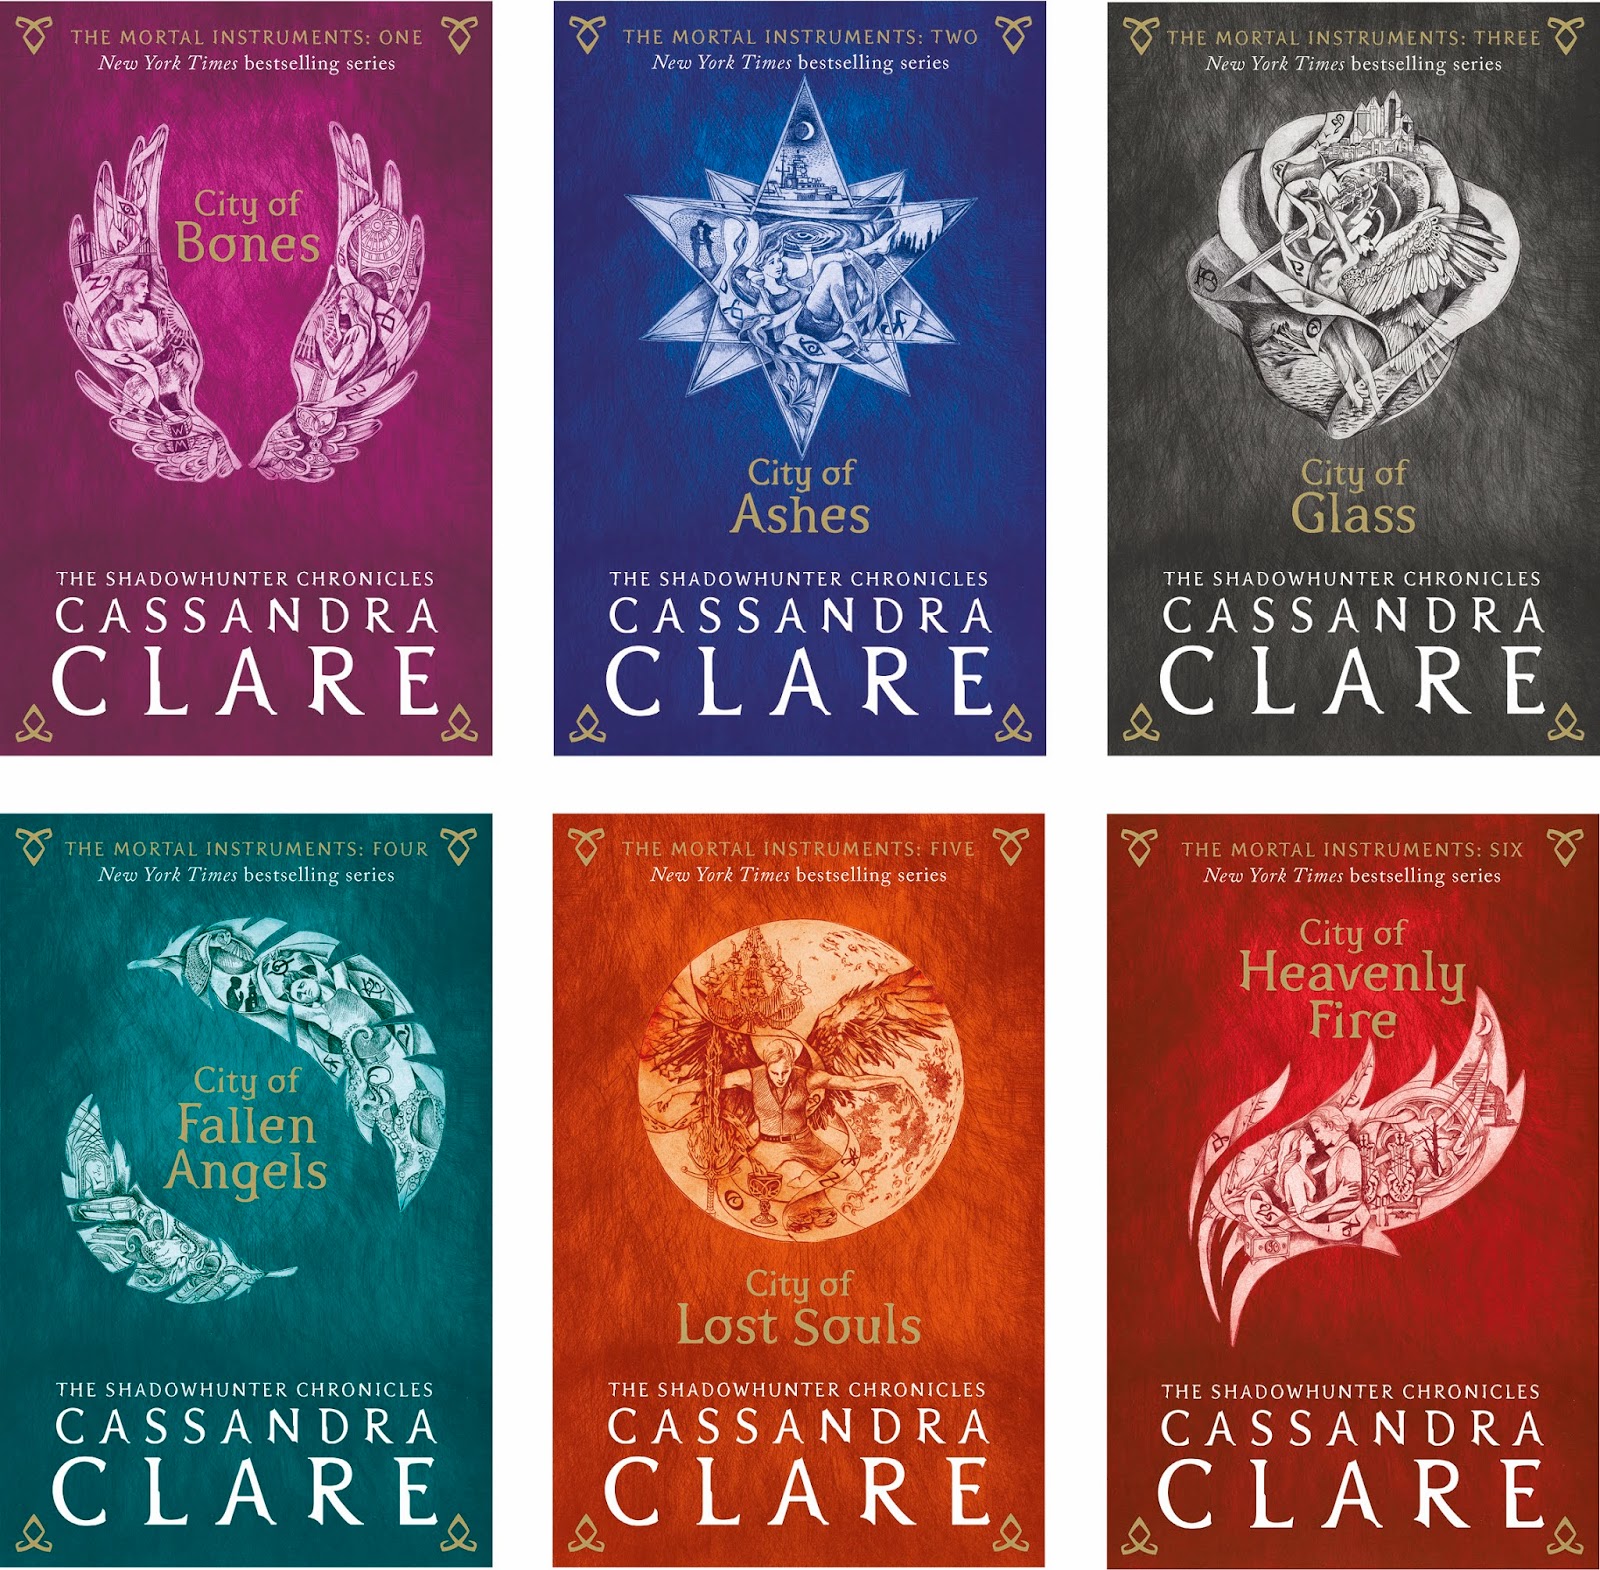 The Mortal Instruments by Cassandra Clare